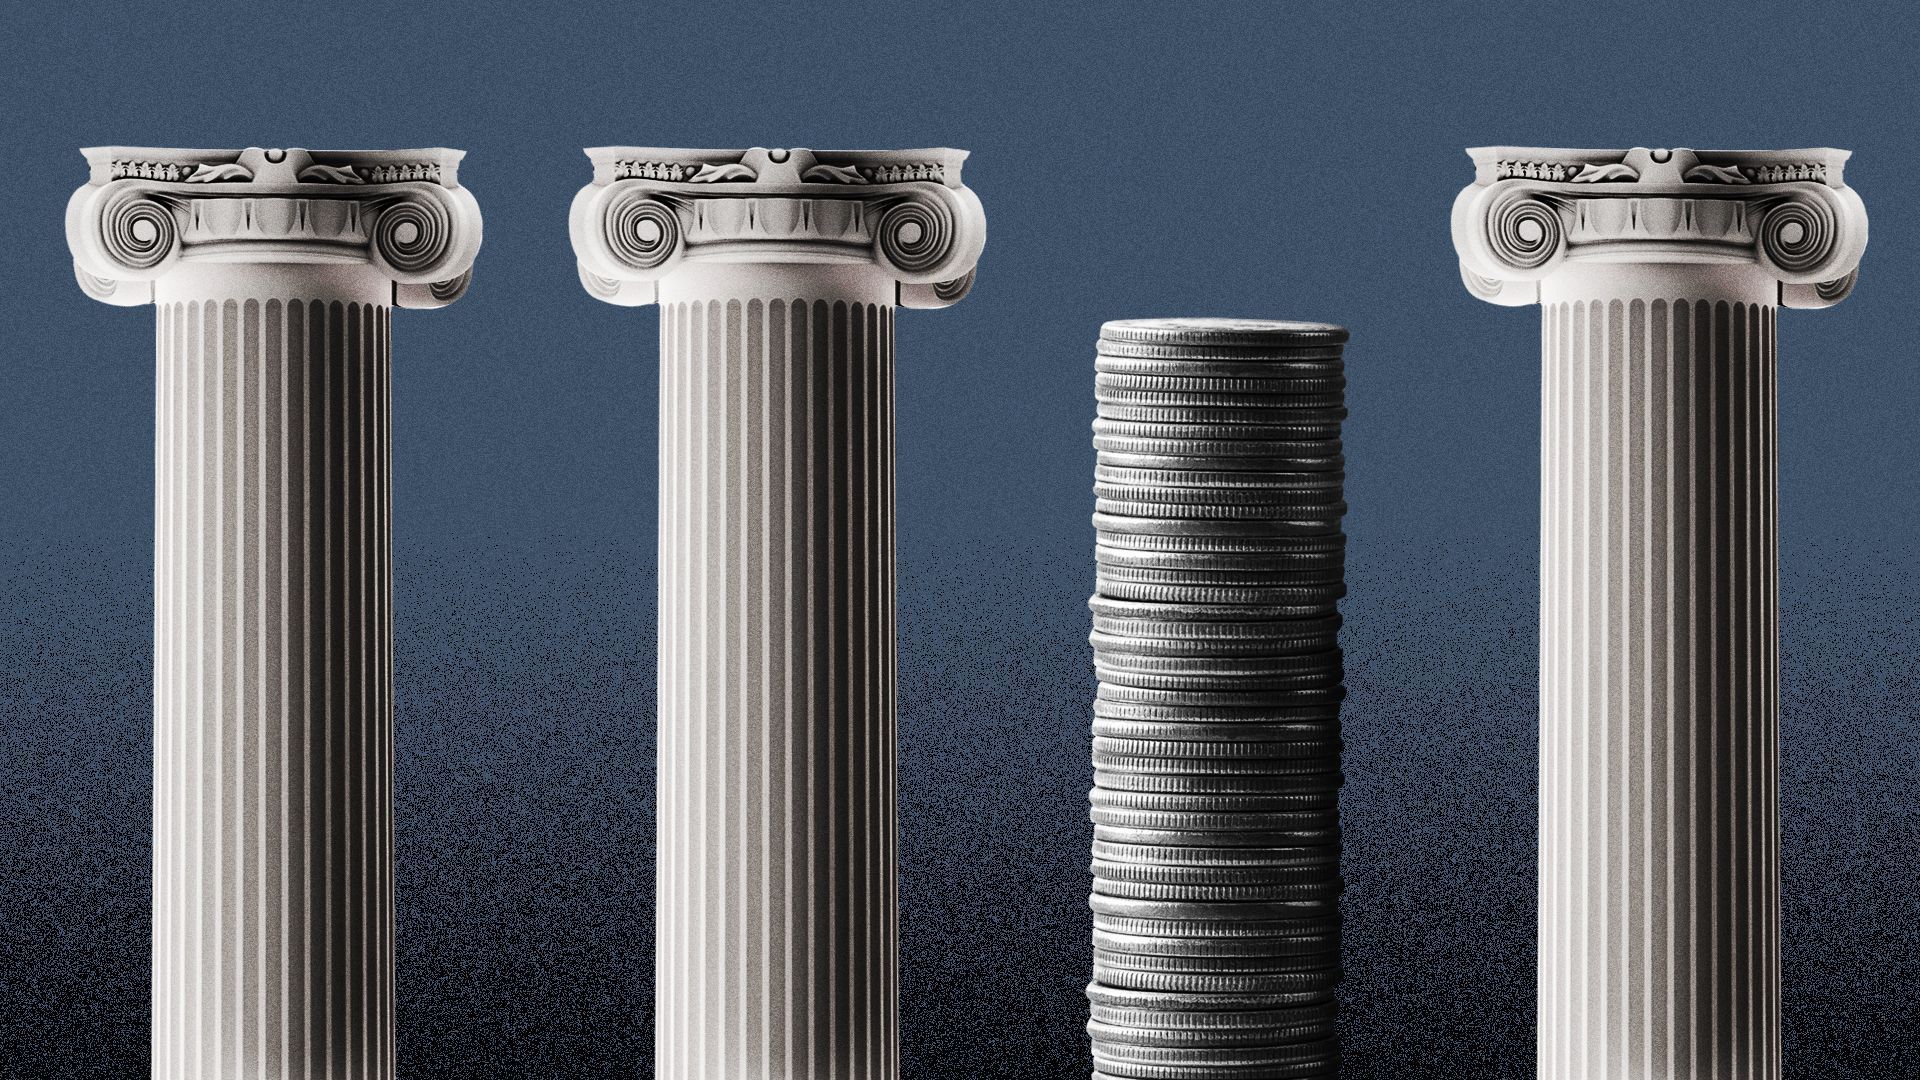 An illo of three Greek pillars, and one made of coins